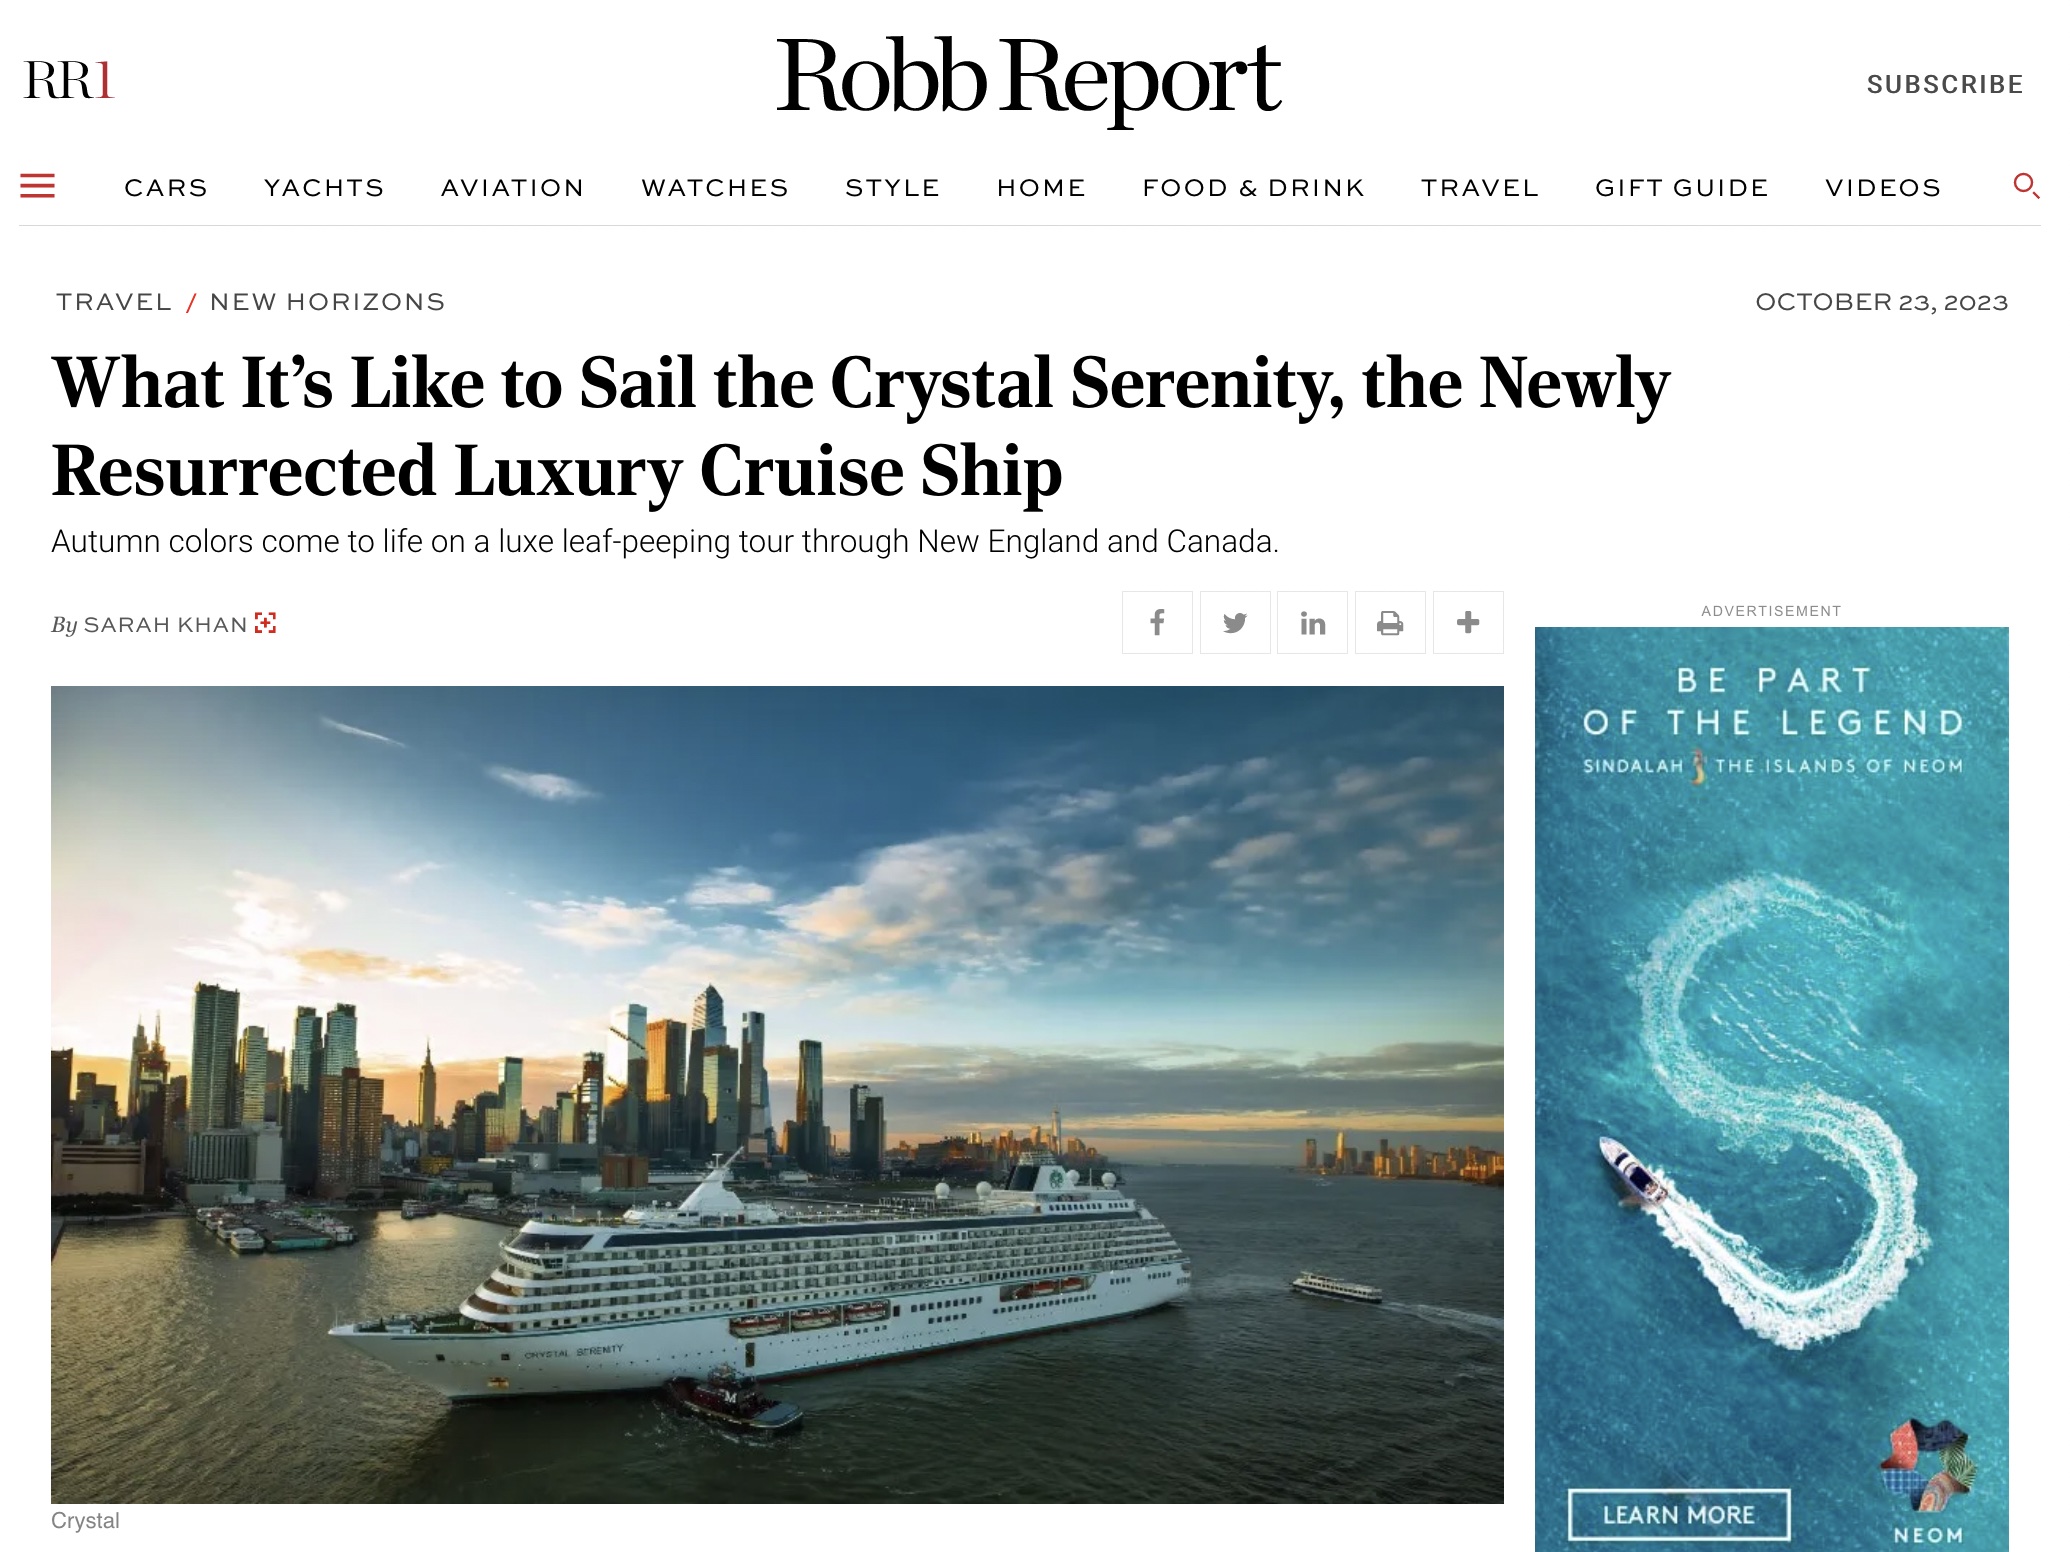 Robb Report: What It’s Like to Sail the Crystal Serenity